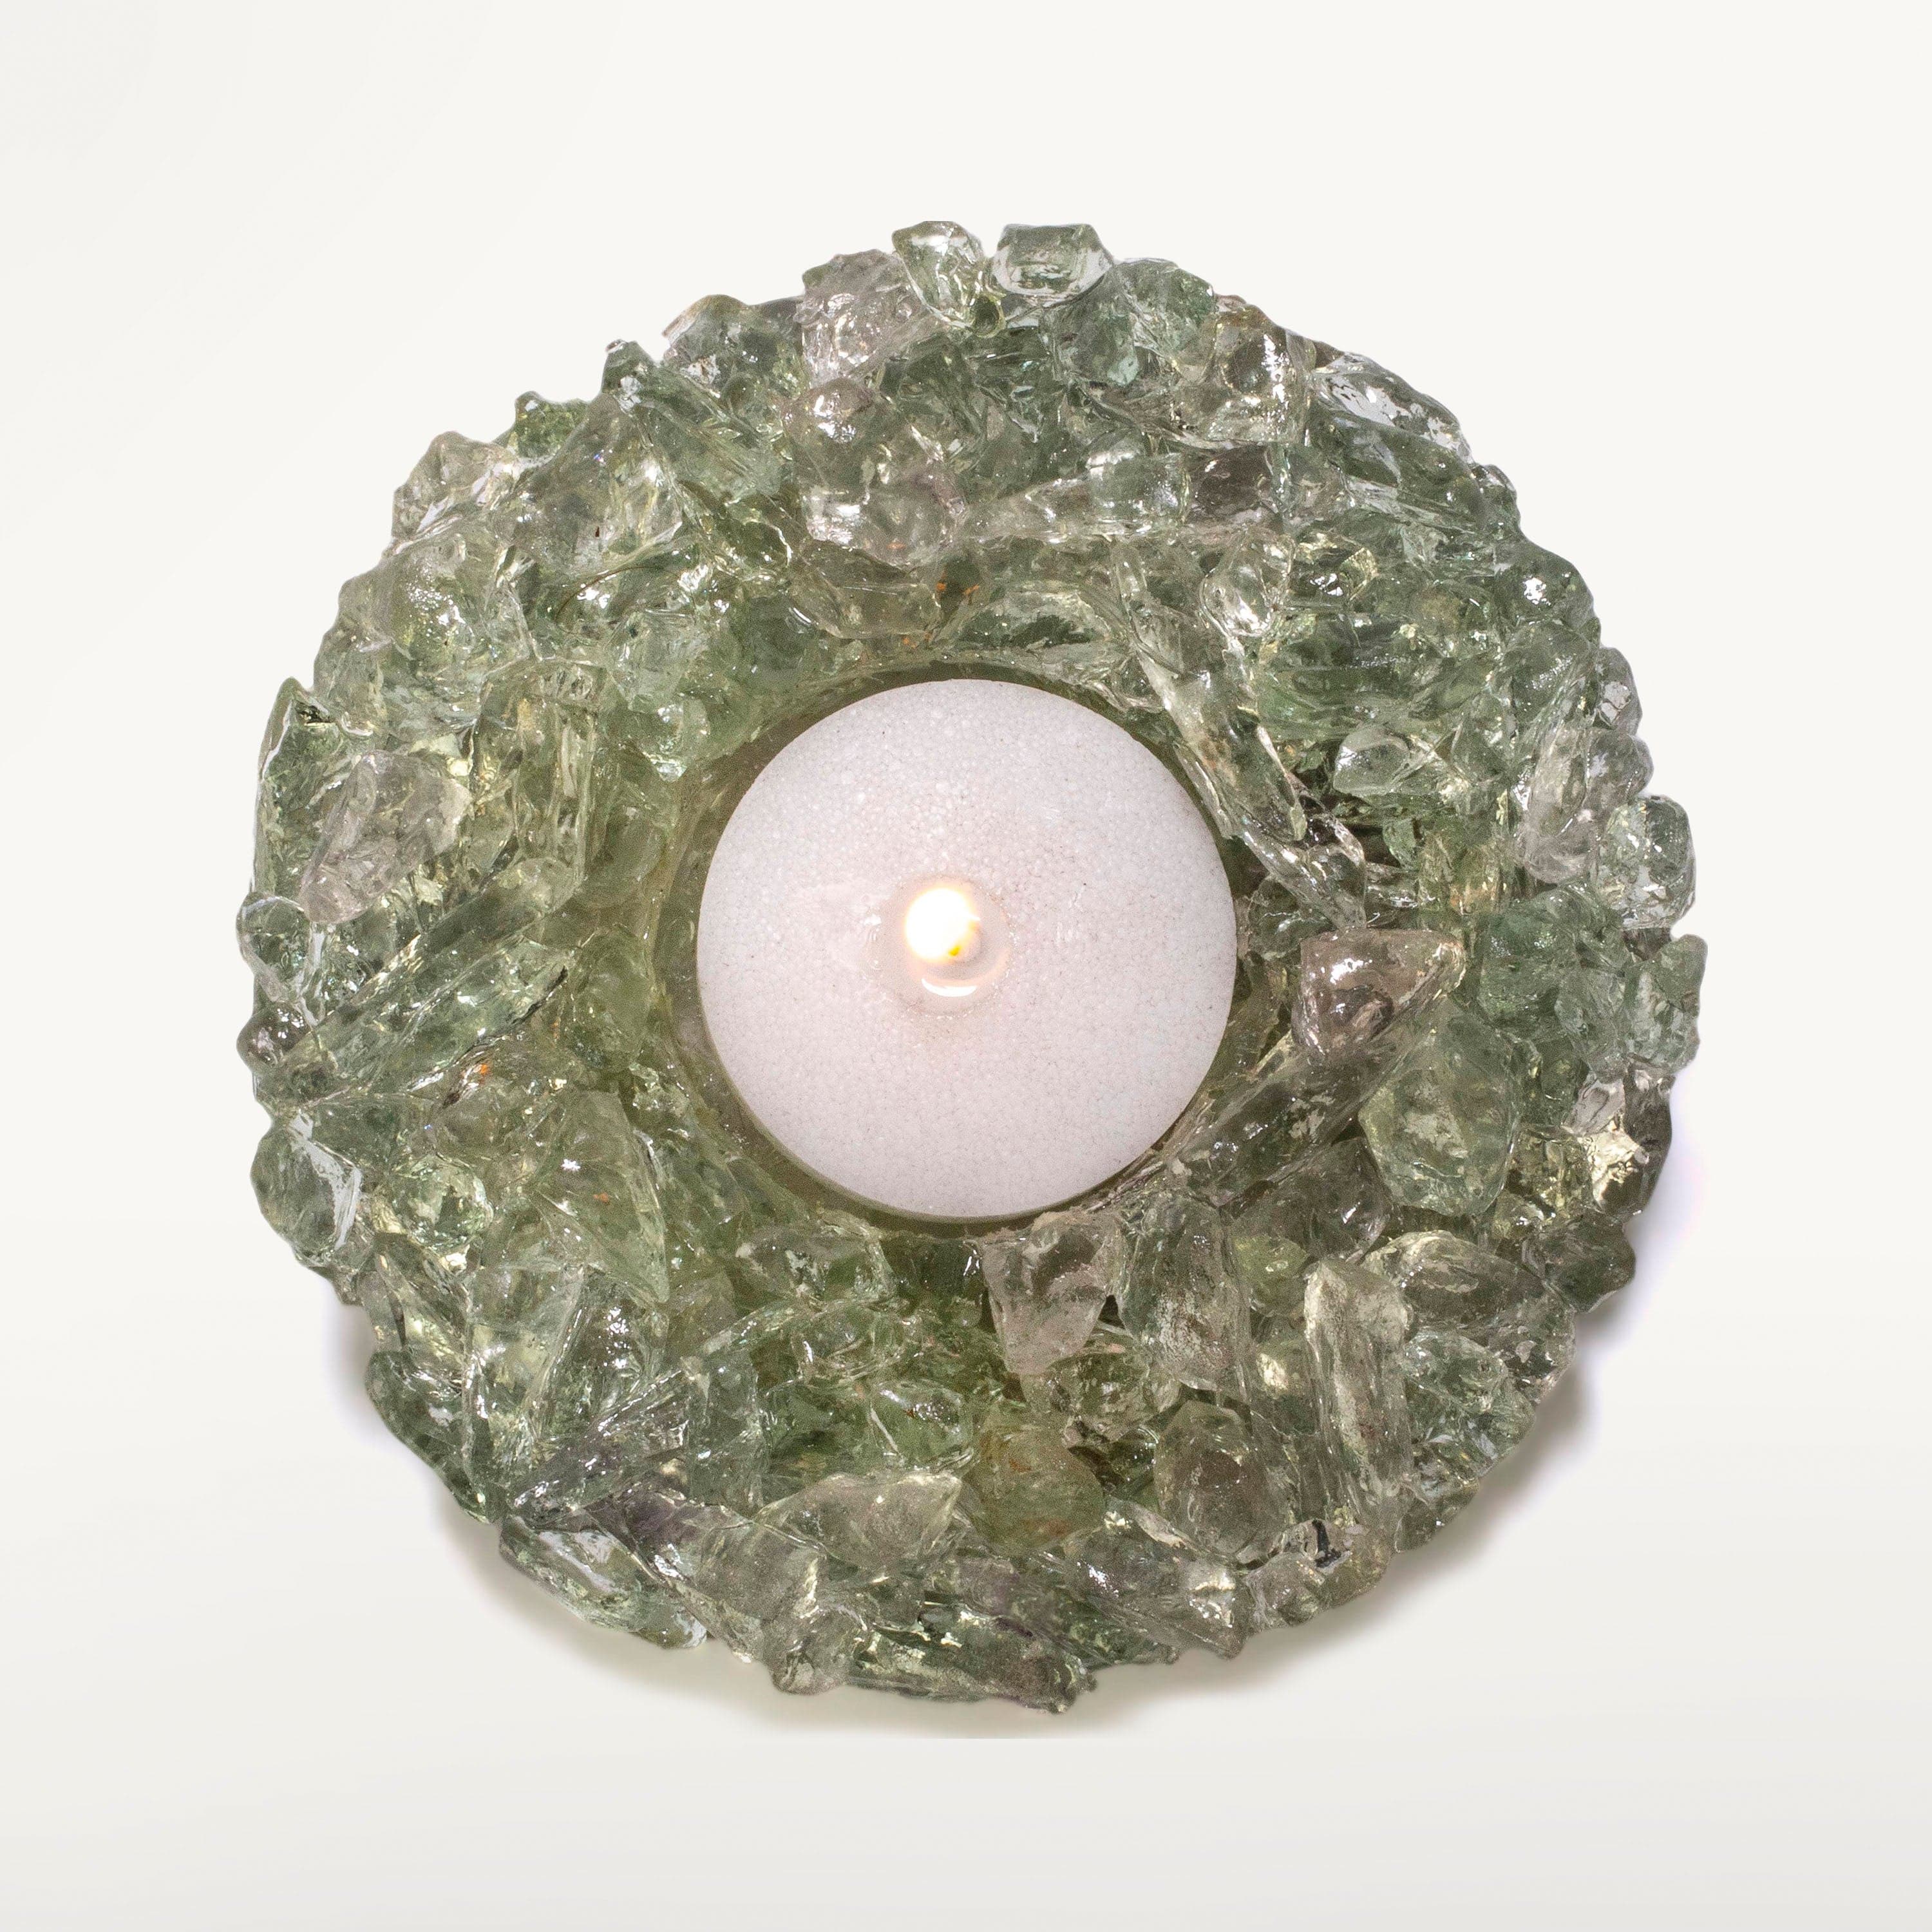 Kalifano Candle Holders Crushed Green Quartz Tealight Candle Holder GCH-19